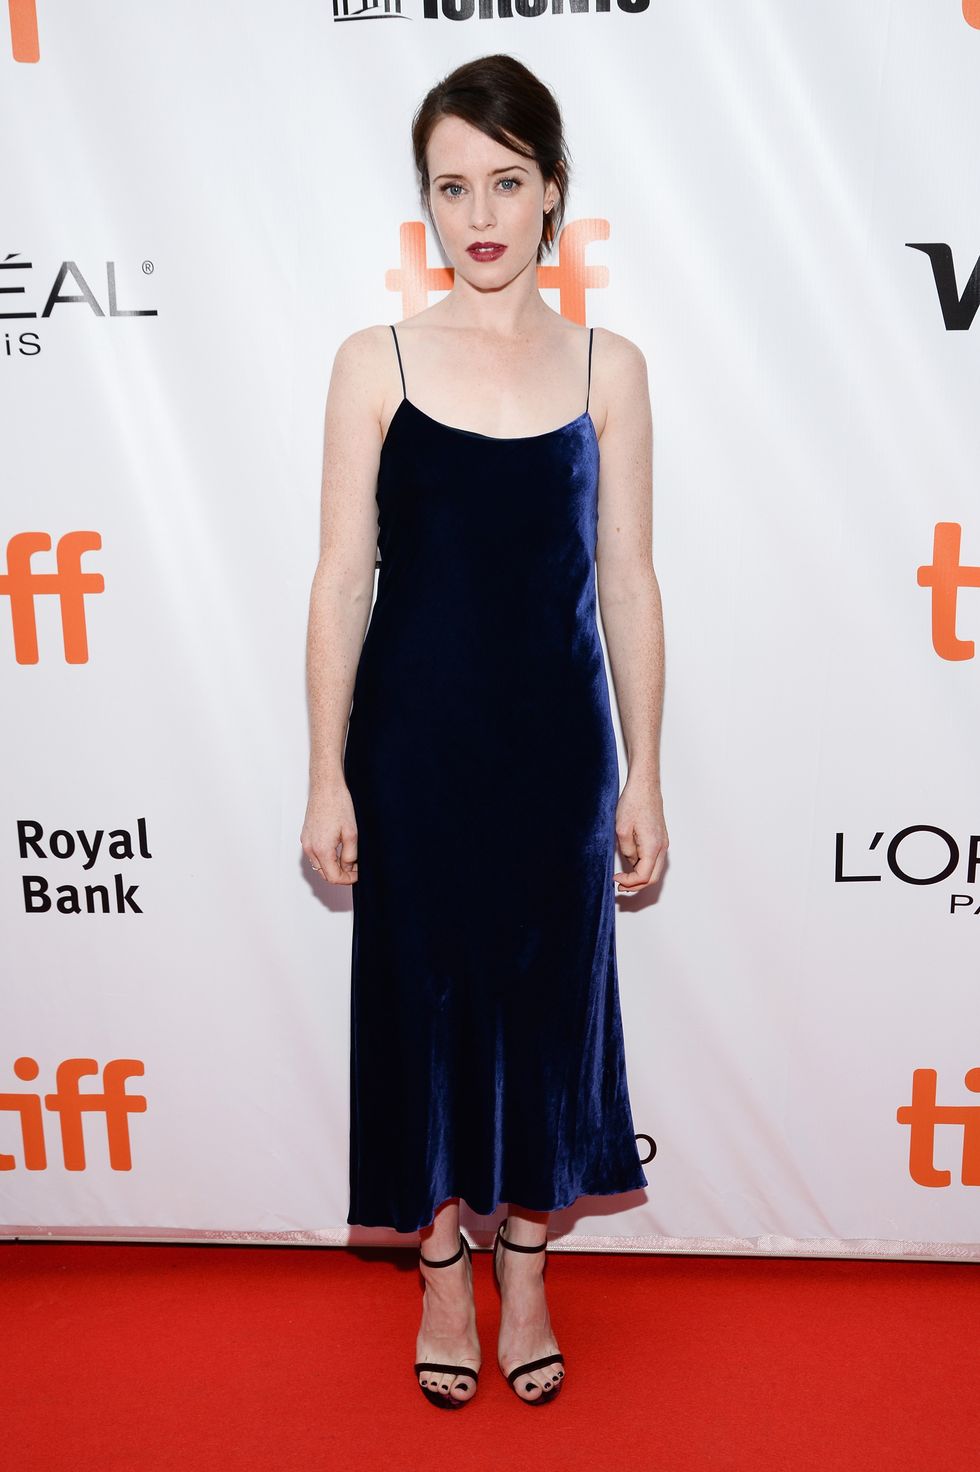 Claire Foy attends the 'Breathe' premiere during the 2017 Toronto International Film Festival